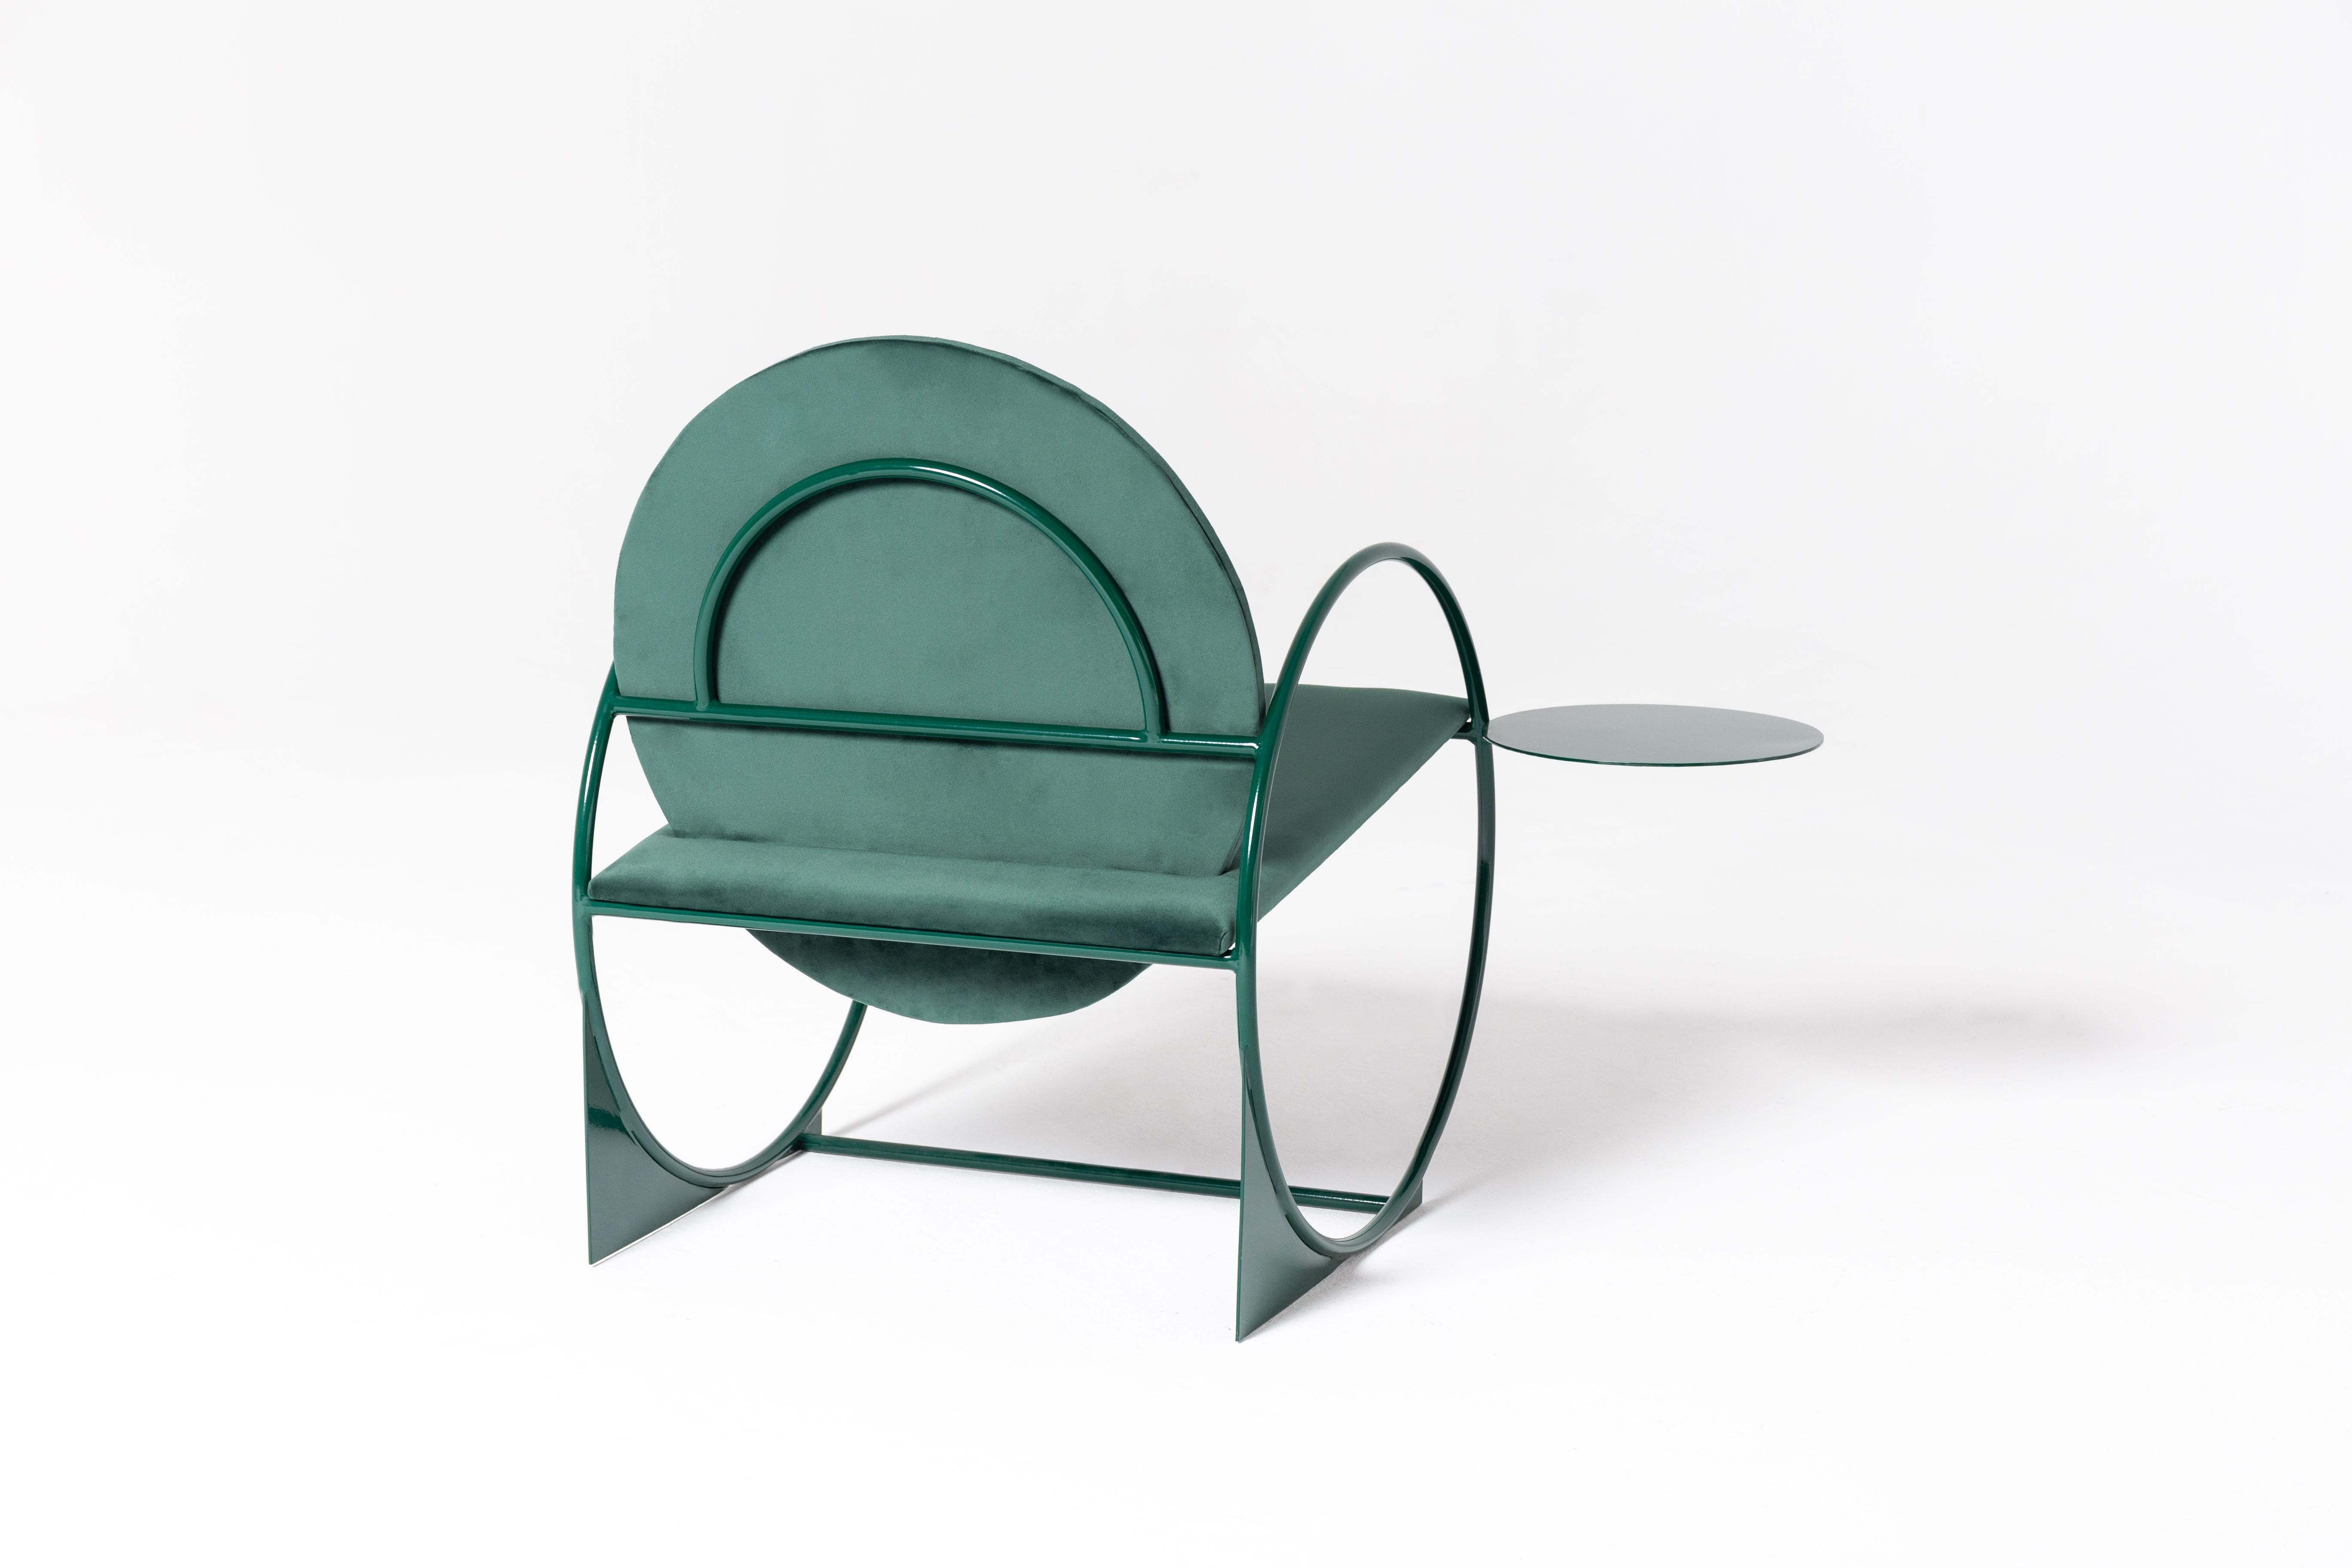 Bullarengue armchair by Ángel Mombiedro
Measures: Cm: 100 x 70 x 40 seat 80 back cm 
Inches: 35 x 28 x 16 seat 32 back in
RAL metallic structure with synthetic velvet seat. Side-tray included
Can be made to order in other colors/dimensions upon